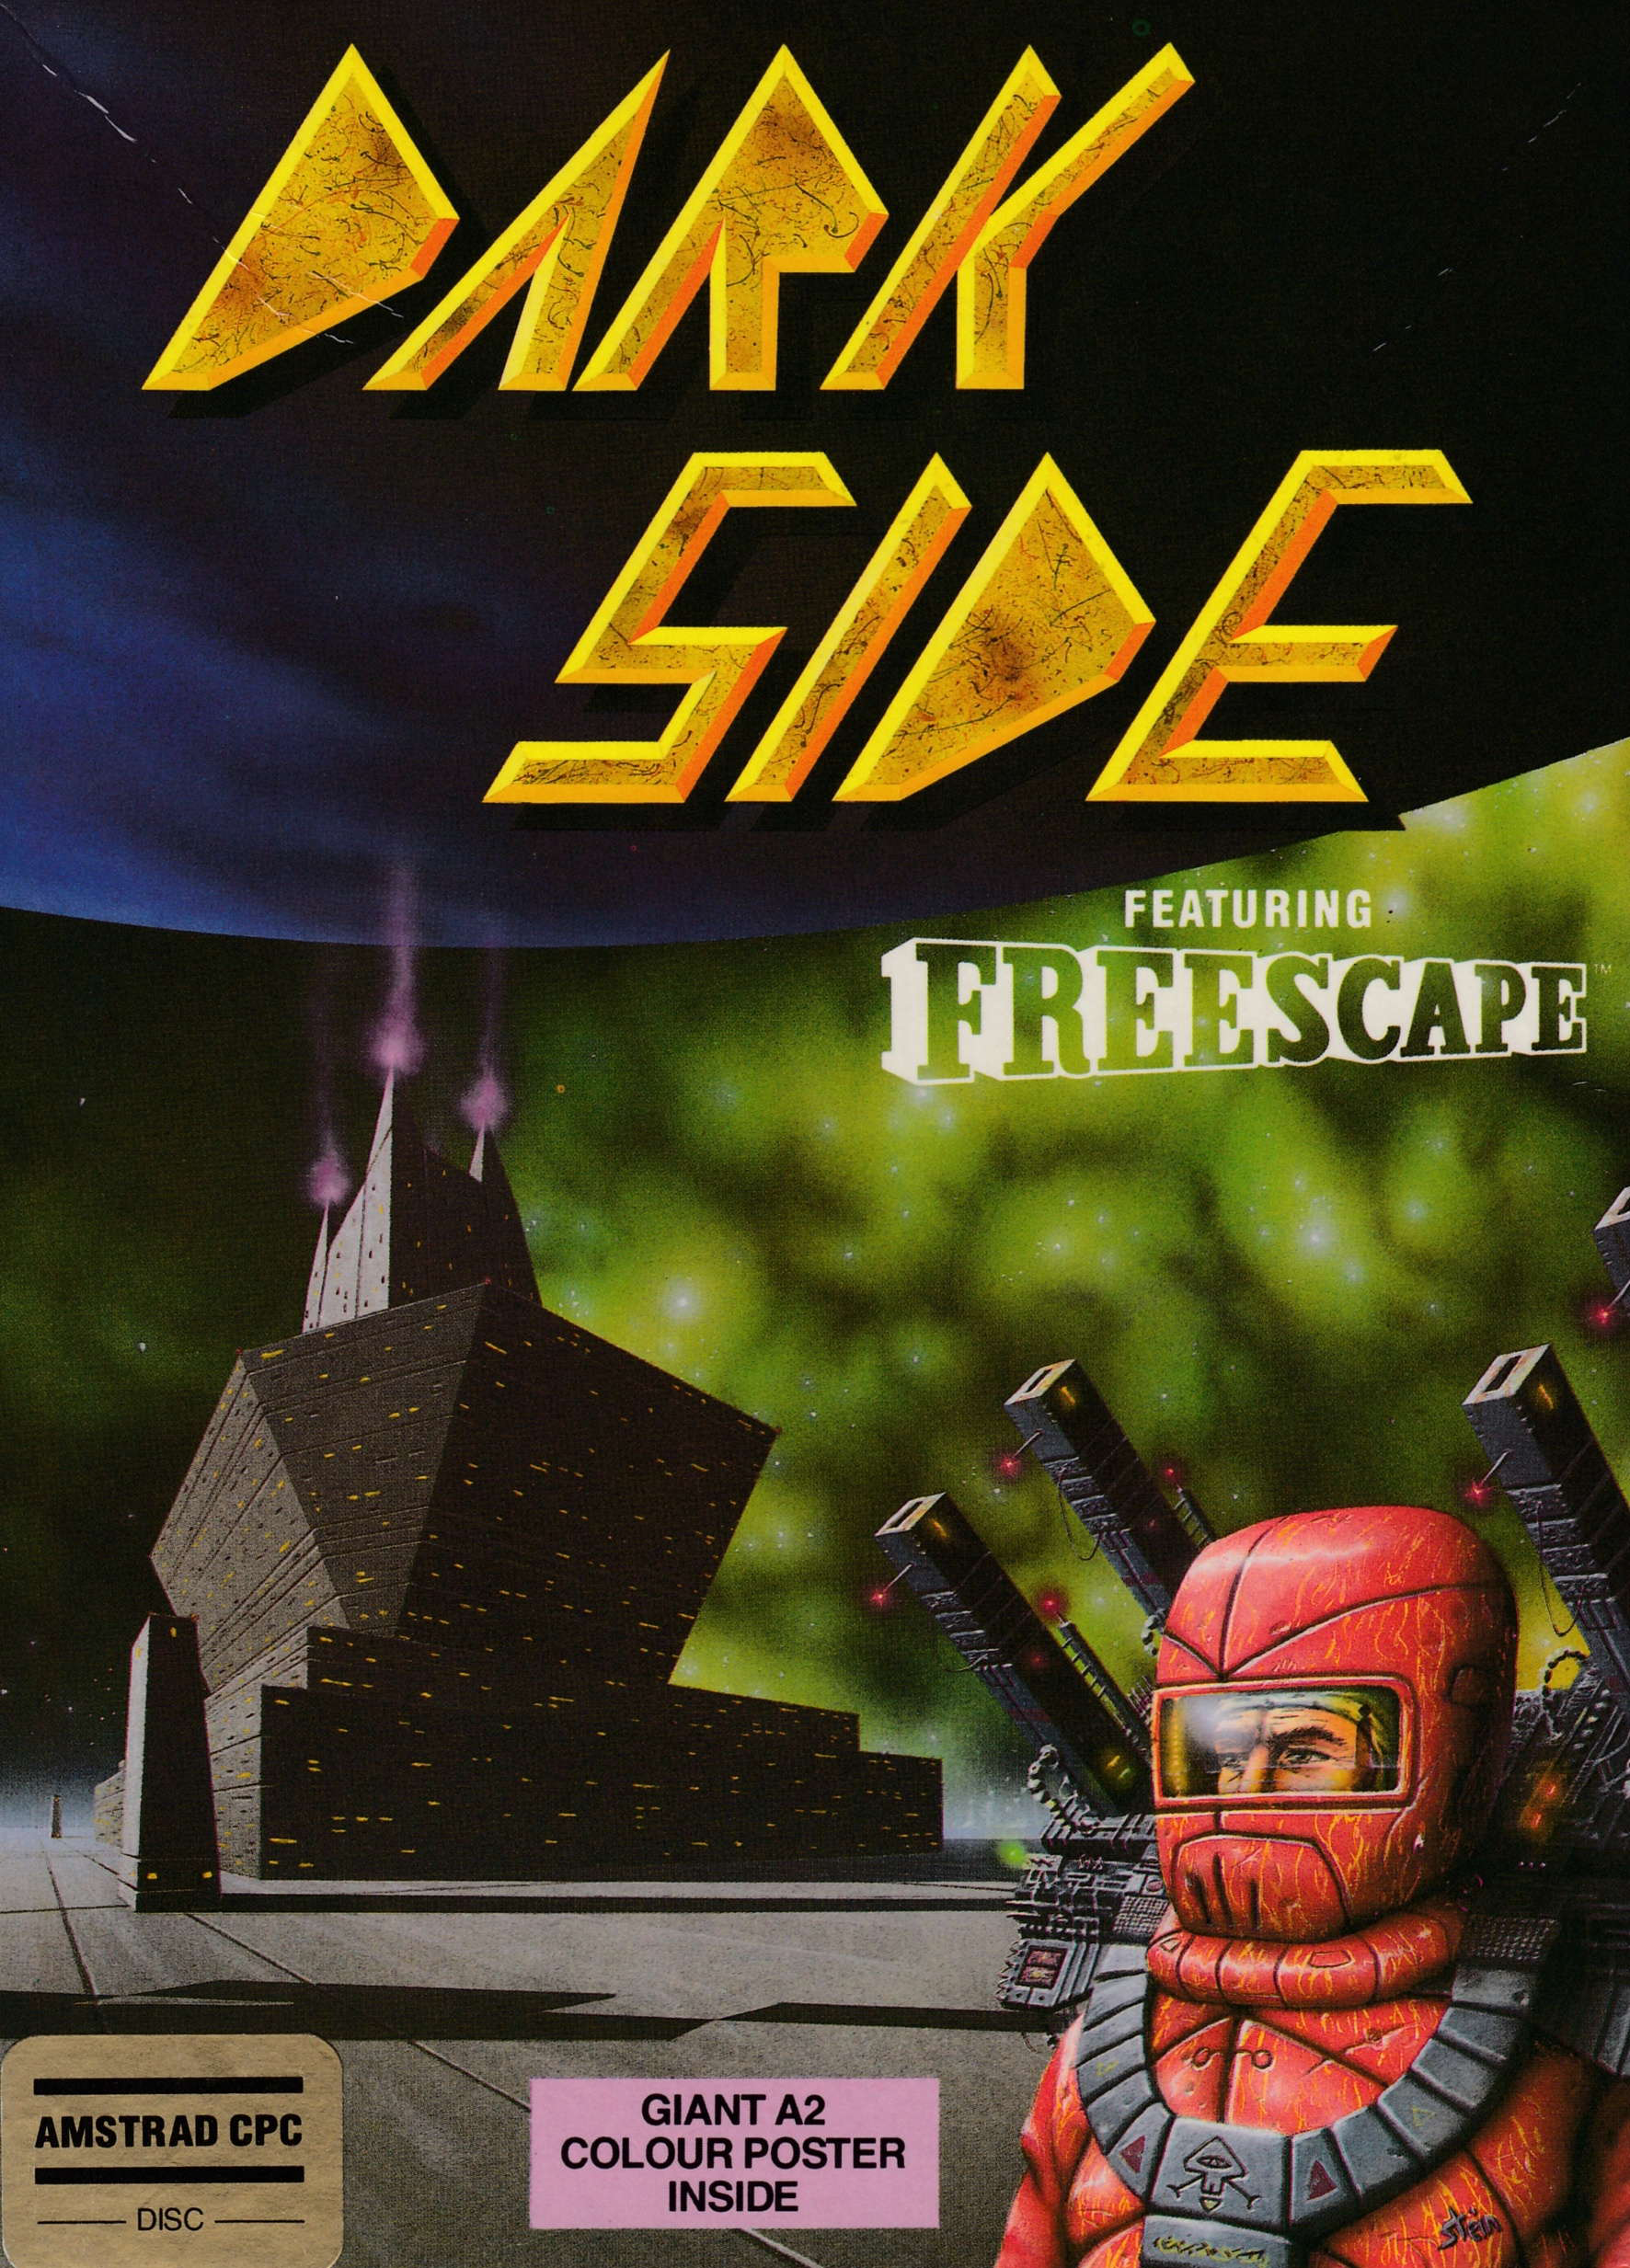 cover of the Amstrad CPC game Dark Side  by GameBase CPC